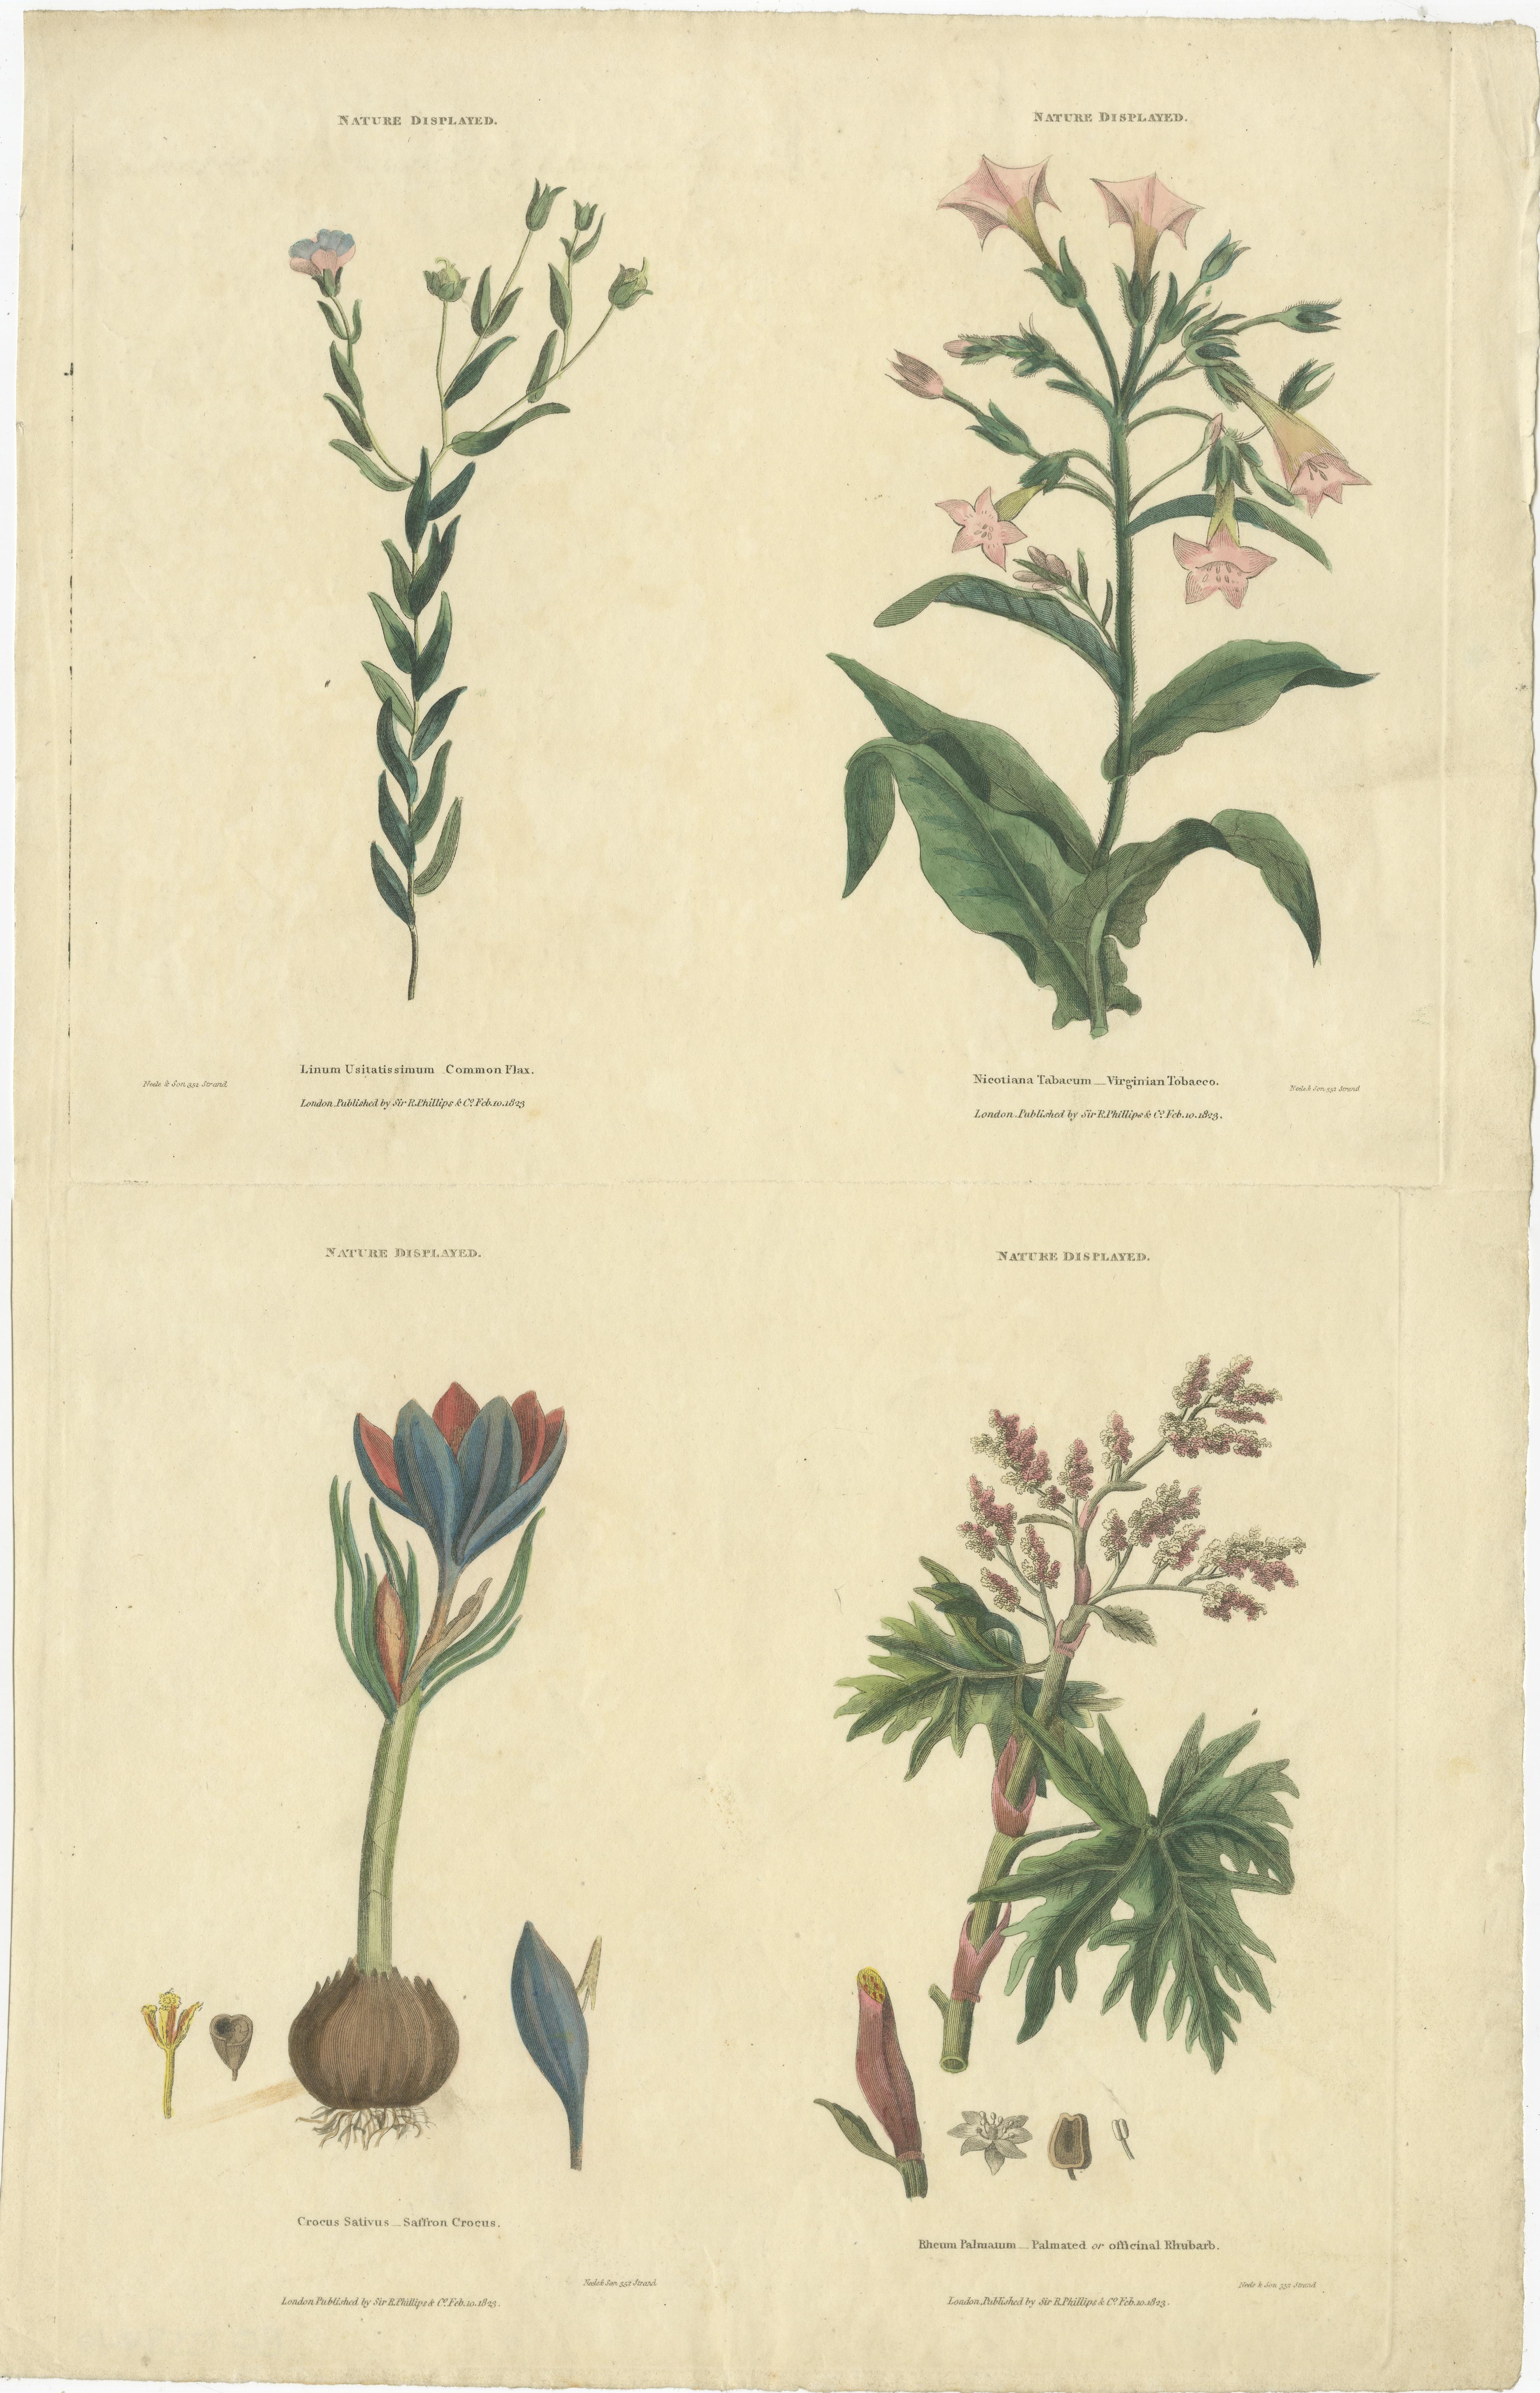 Antique print titled 'Crocus Sativus (..)'. Four images of flowers on one sheet, printed from two plates. The upper two show Linum Usitatissimum (or Common Flax) and Nicotiana tabacum (or cultivated tobacco). The lower two show Crocus Sativus (or